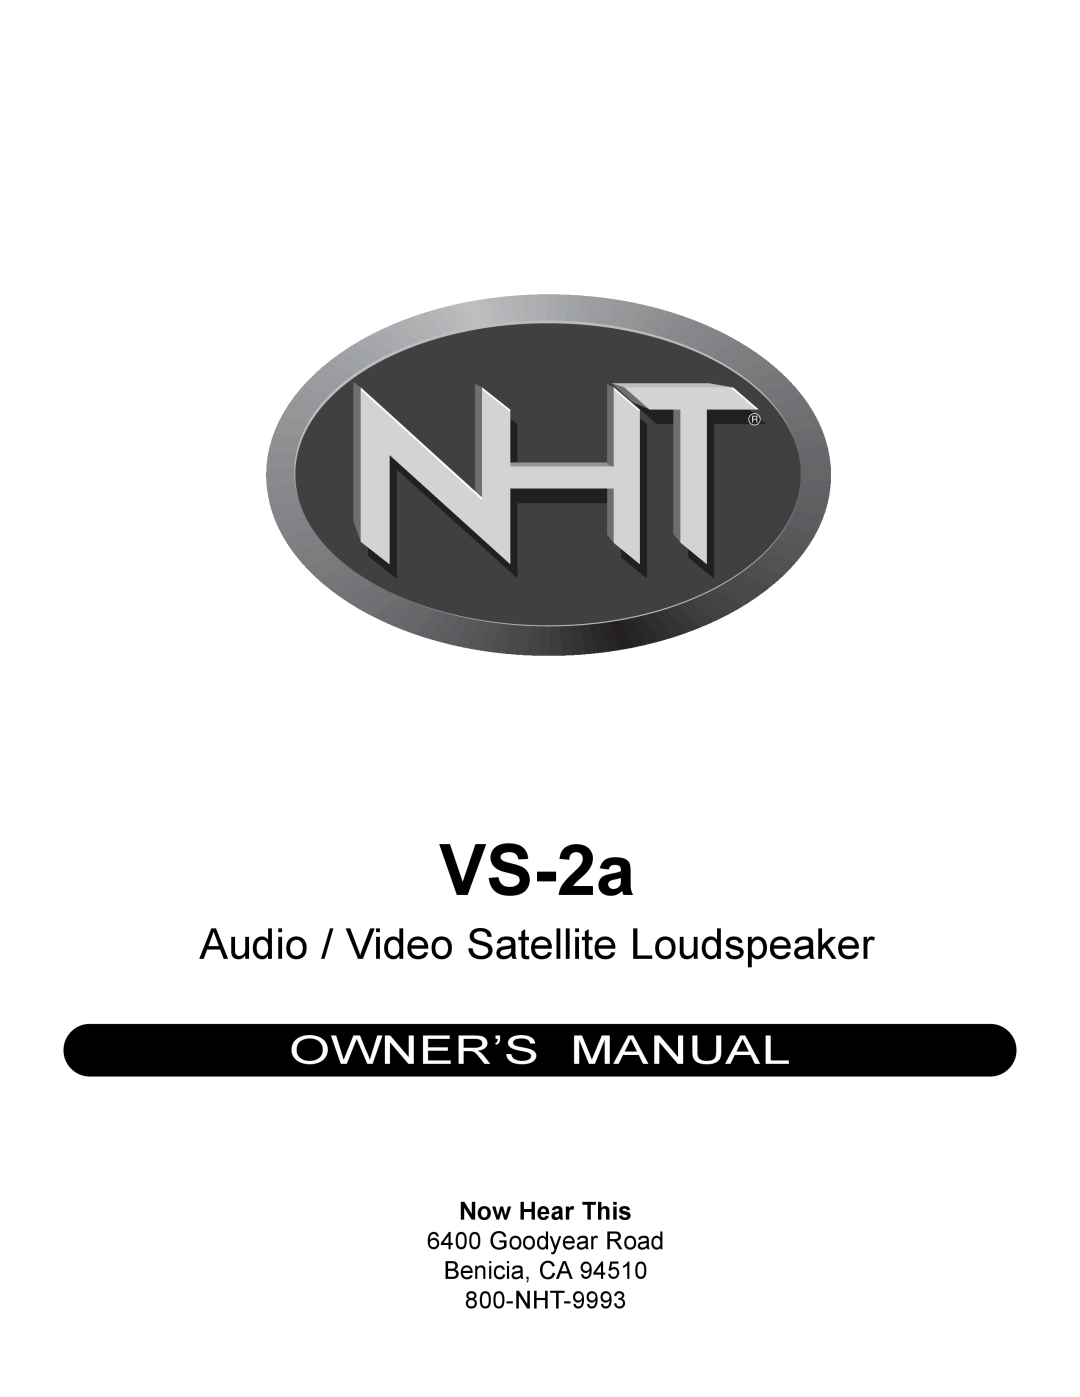 NHT VS-2a owner manual Audio / Video Satellite Loudspeaker, Now Hear This, Goodyear Road Benicia, CA 800-NHT-9993 